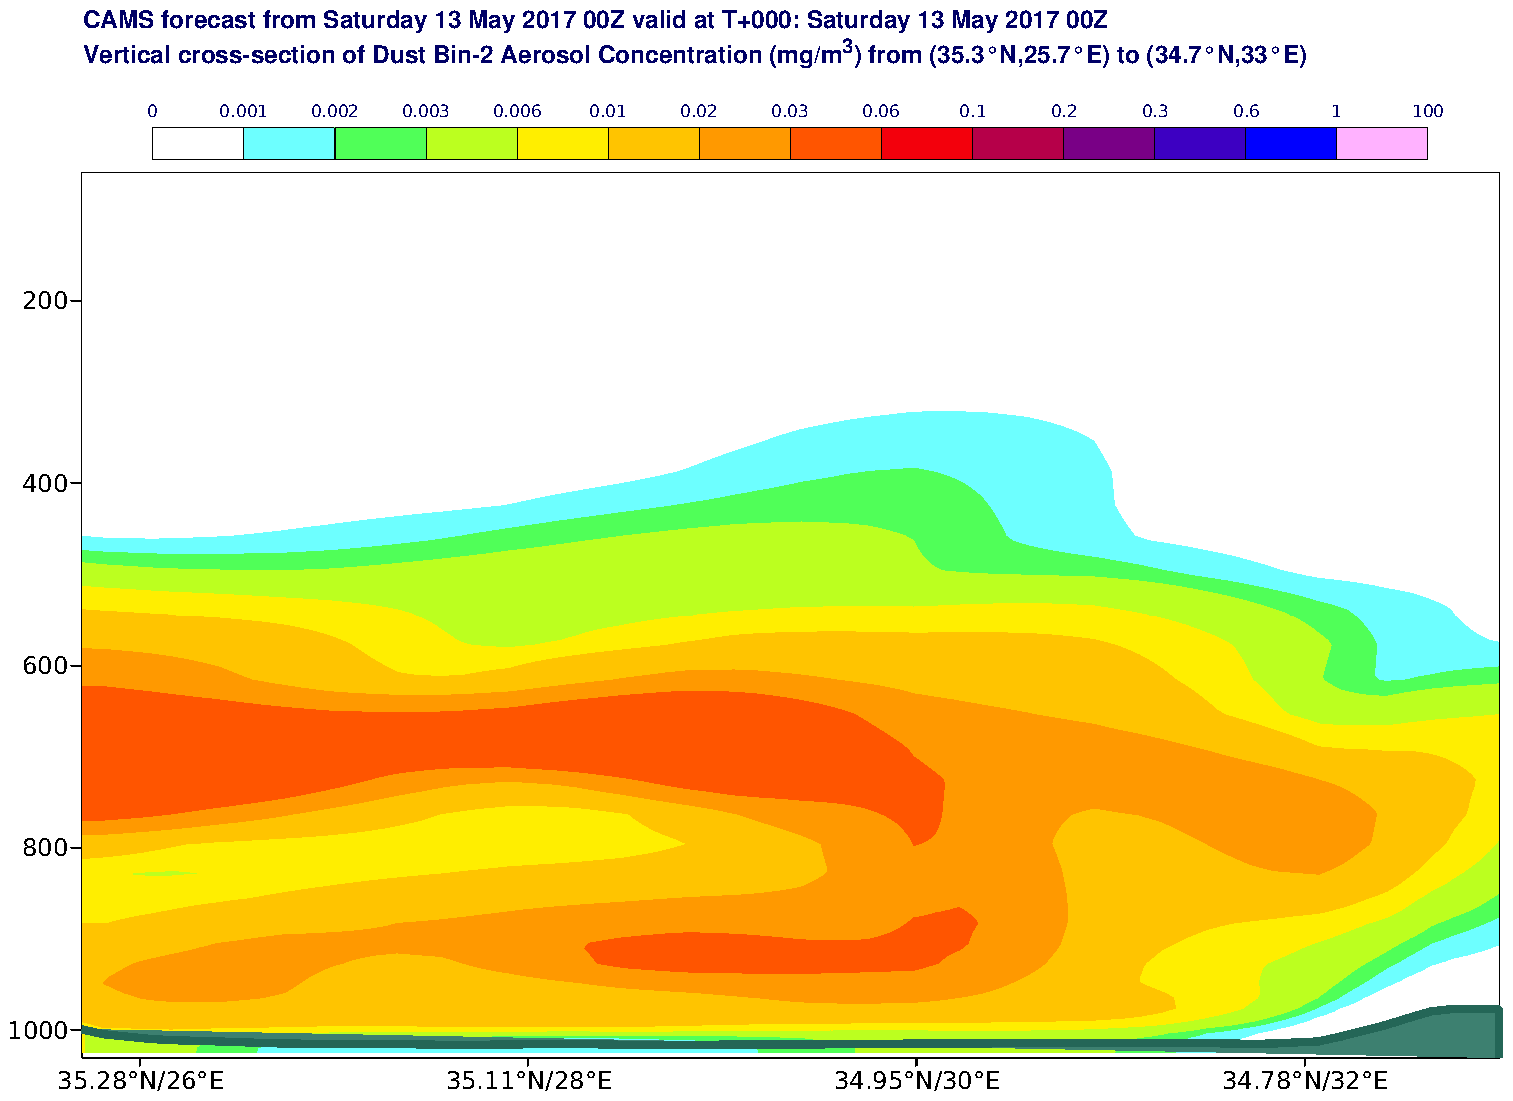 Vertical cross-section of Dust Bin-2 Aerosol Concentration (mg/m3) valid at T0 - 2017-05-13 00:00